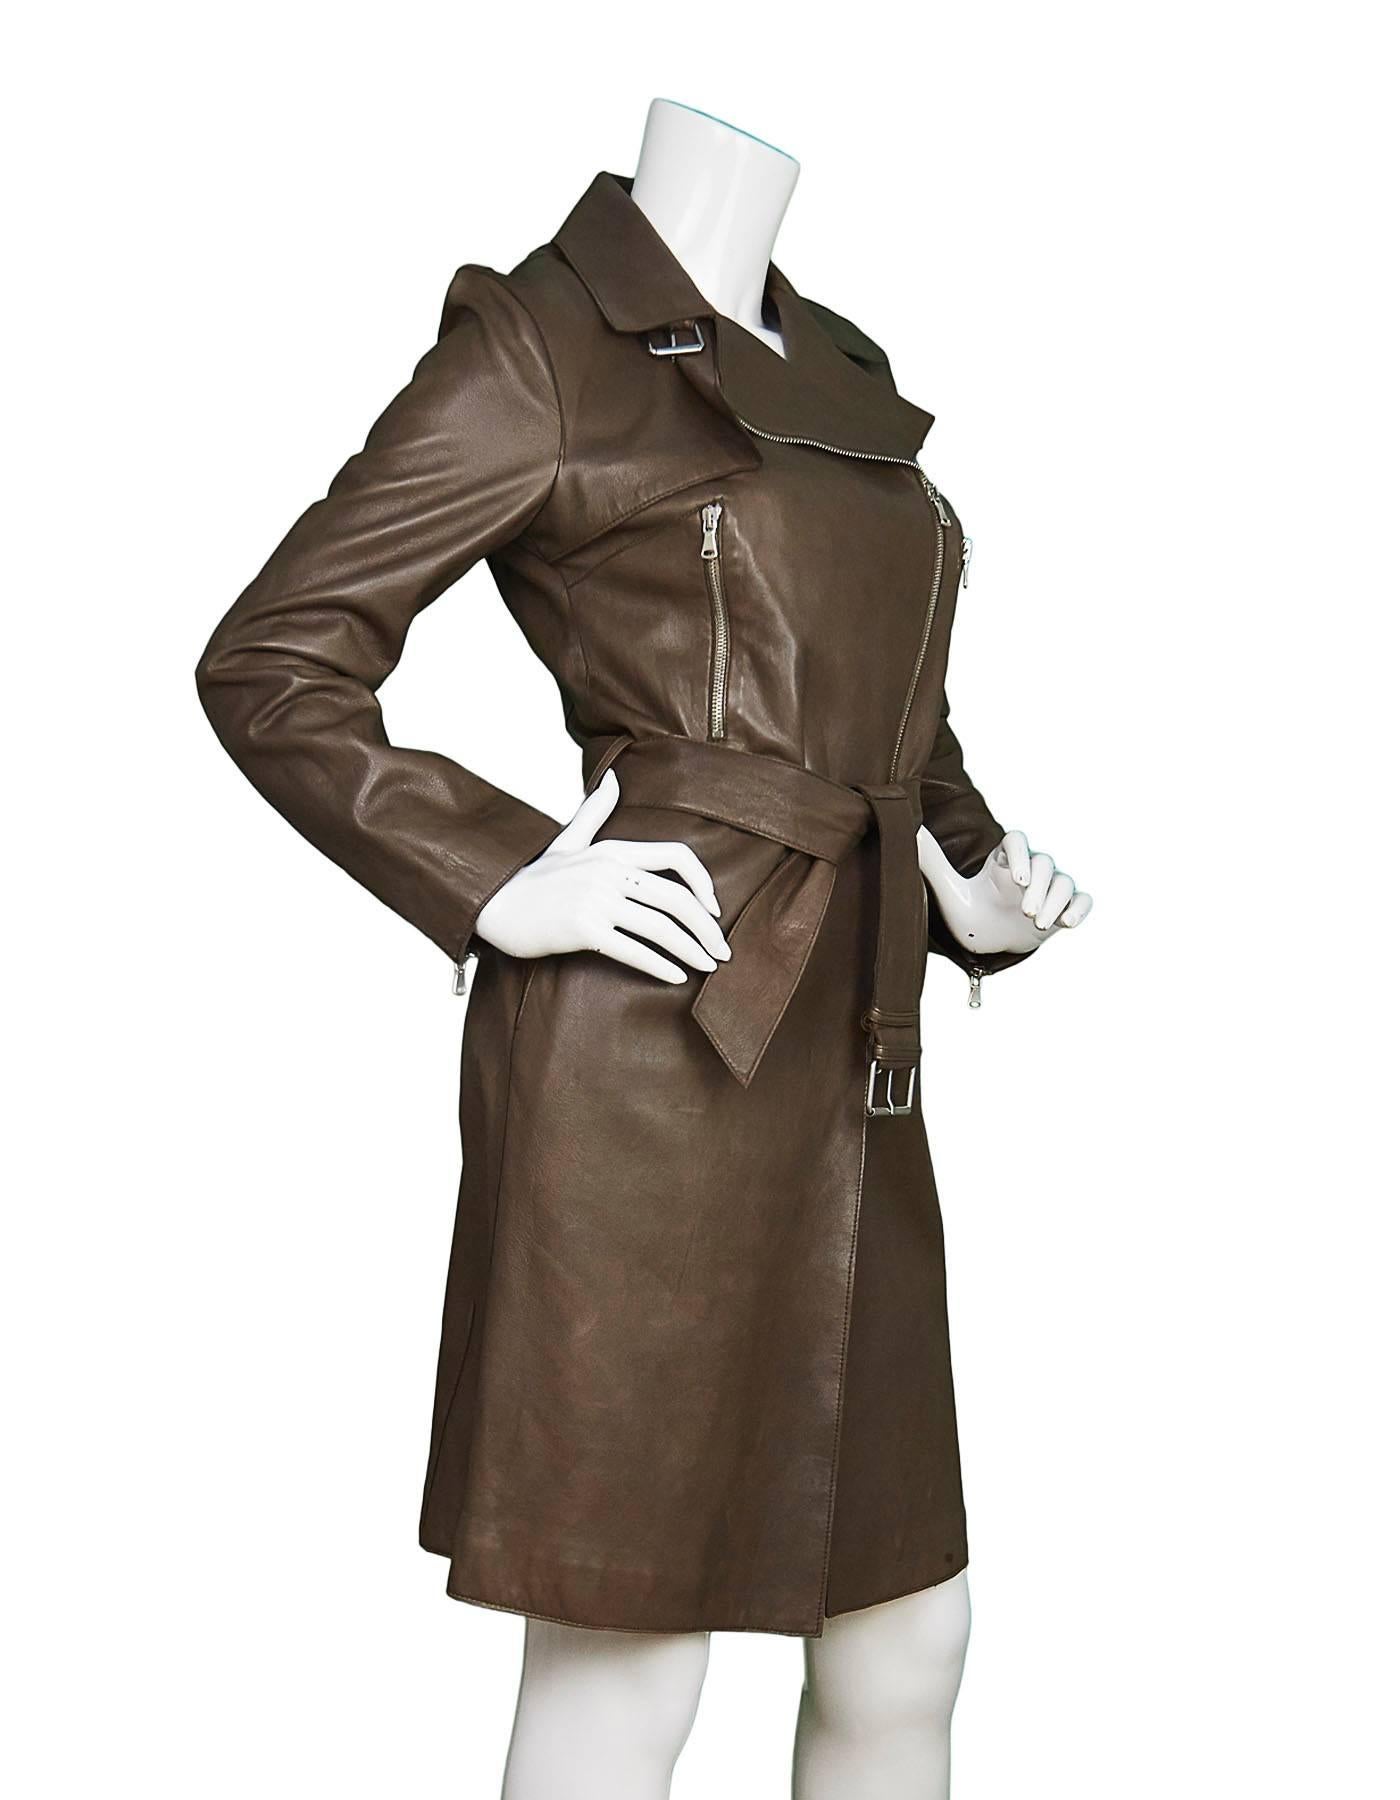 Joseph Brown Leather Trench Coat 
Features brown leather waist tie

Made In: Italy
Color: Brown
Composition: 100% lambskin
Lining: Charcoal, wool
Closure/Opening: Double zip up closure
Exterior Pockets: Two zipper pockets and two hip slit